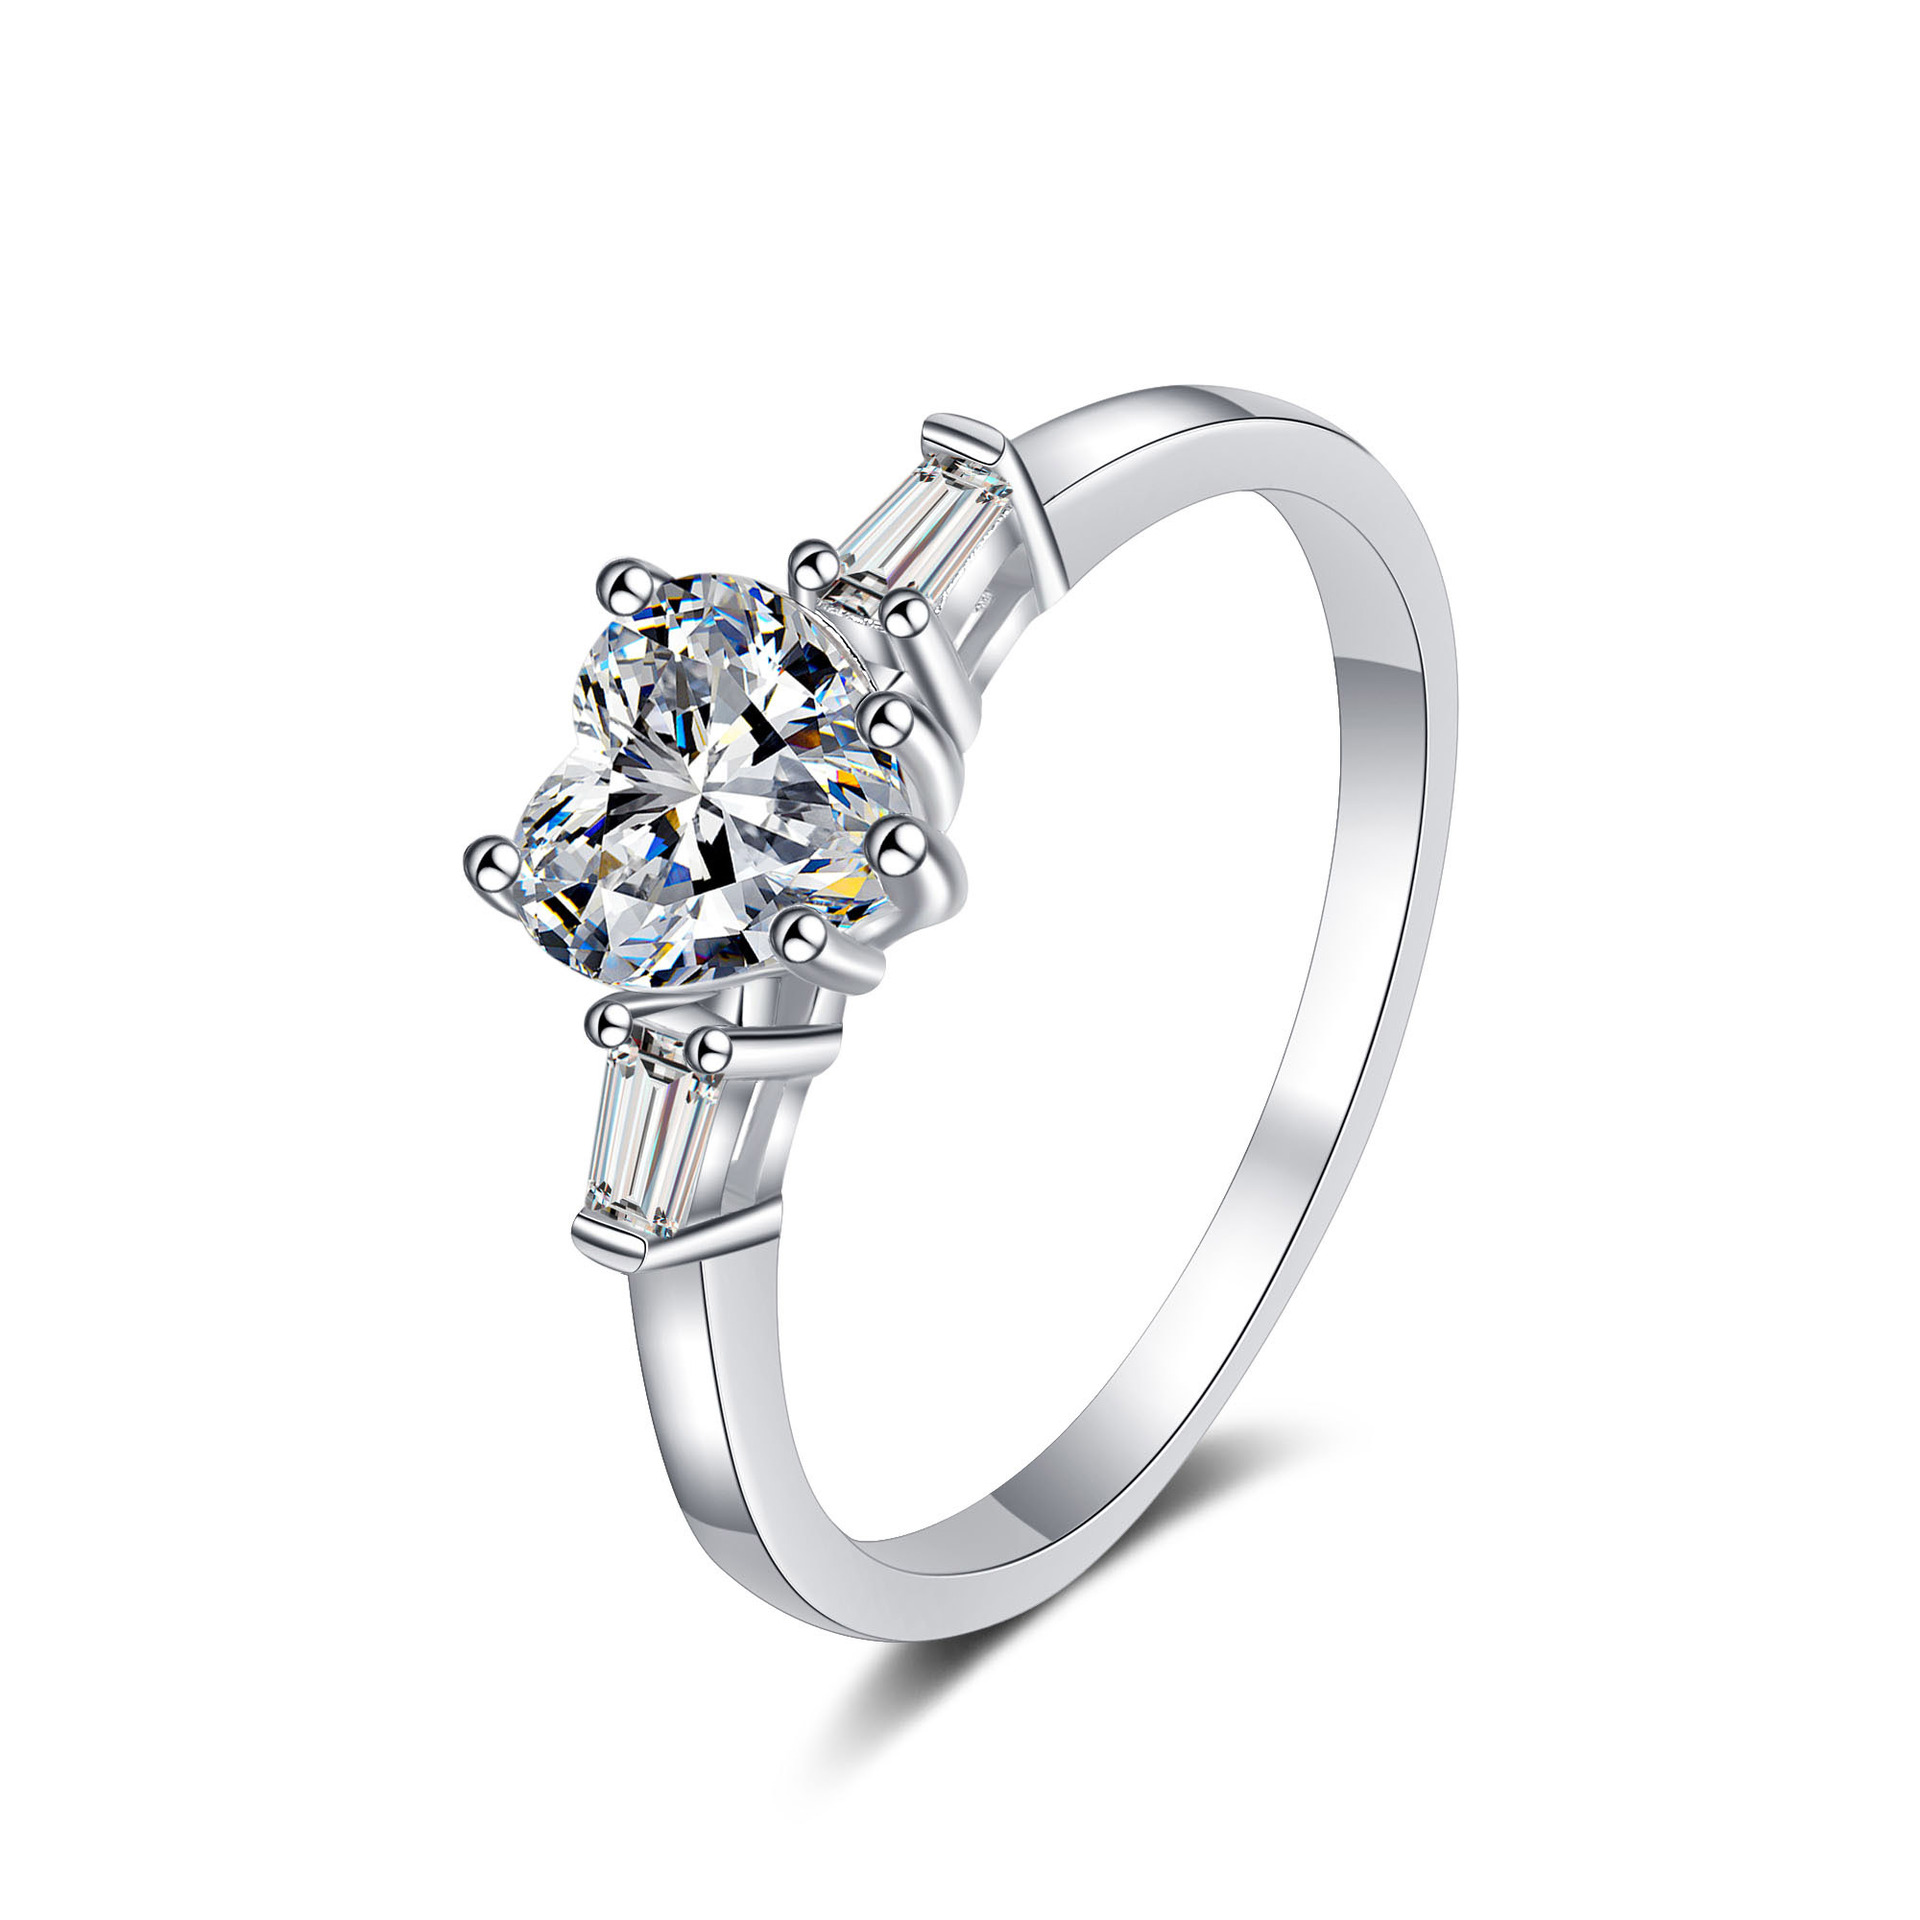 Trendy jewelry for Niece Cocktail ring High clarity for D-grade Moissanite Precisely inlaid D-grade Moissanite